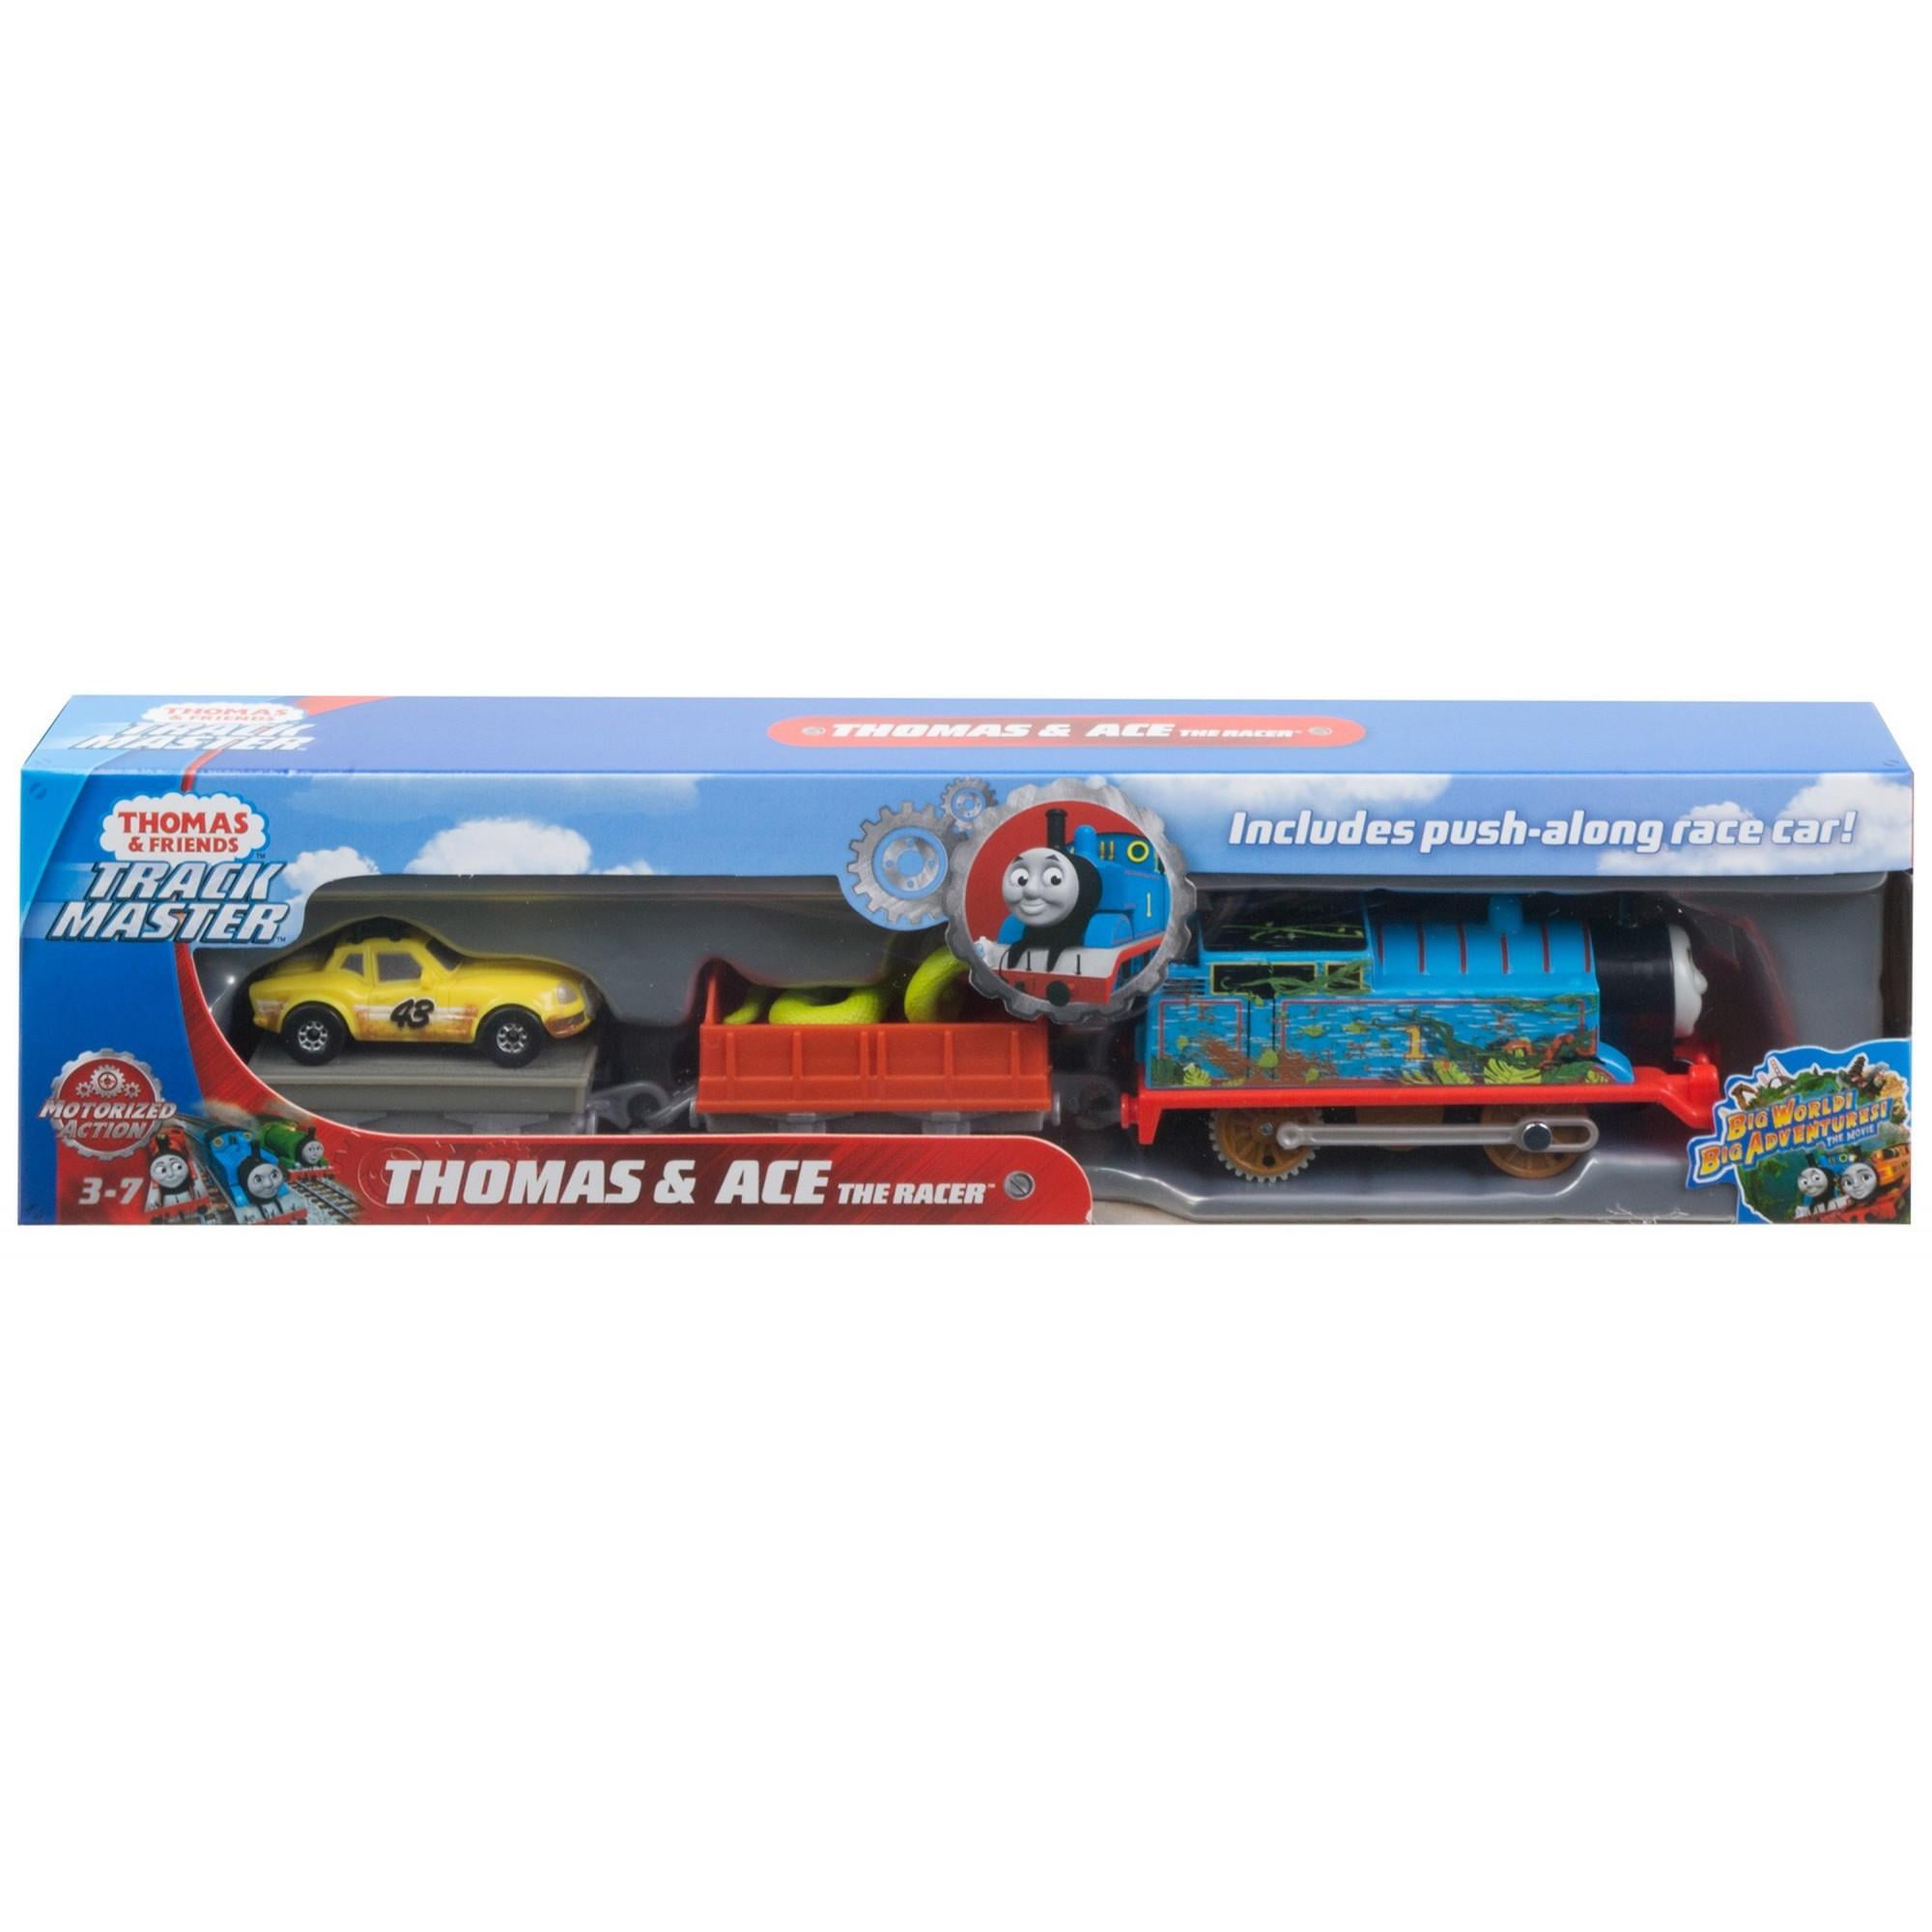 ace the racer thomas